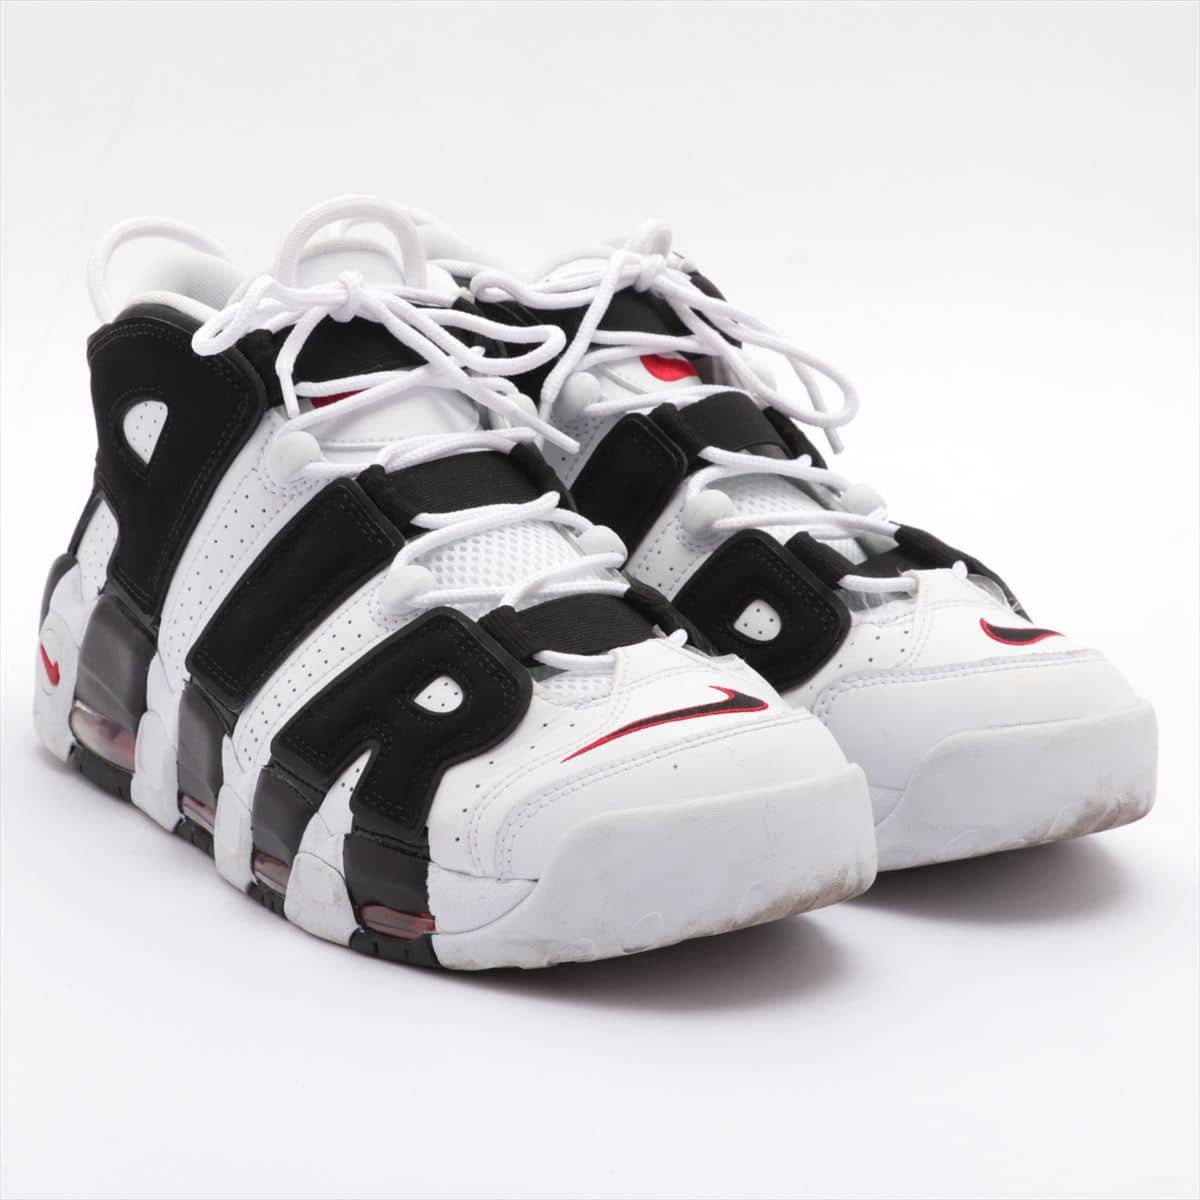 Nike Faux leather High-top Sneakers JPN28.5 Men's Black × White Air more uptempo  414962-105